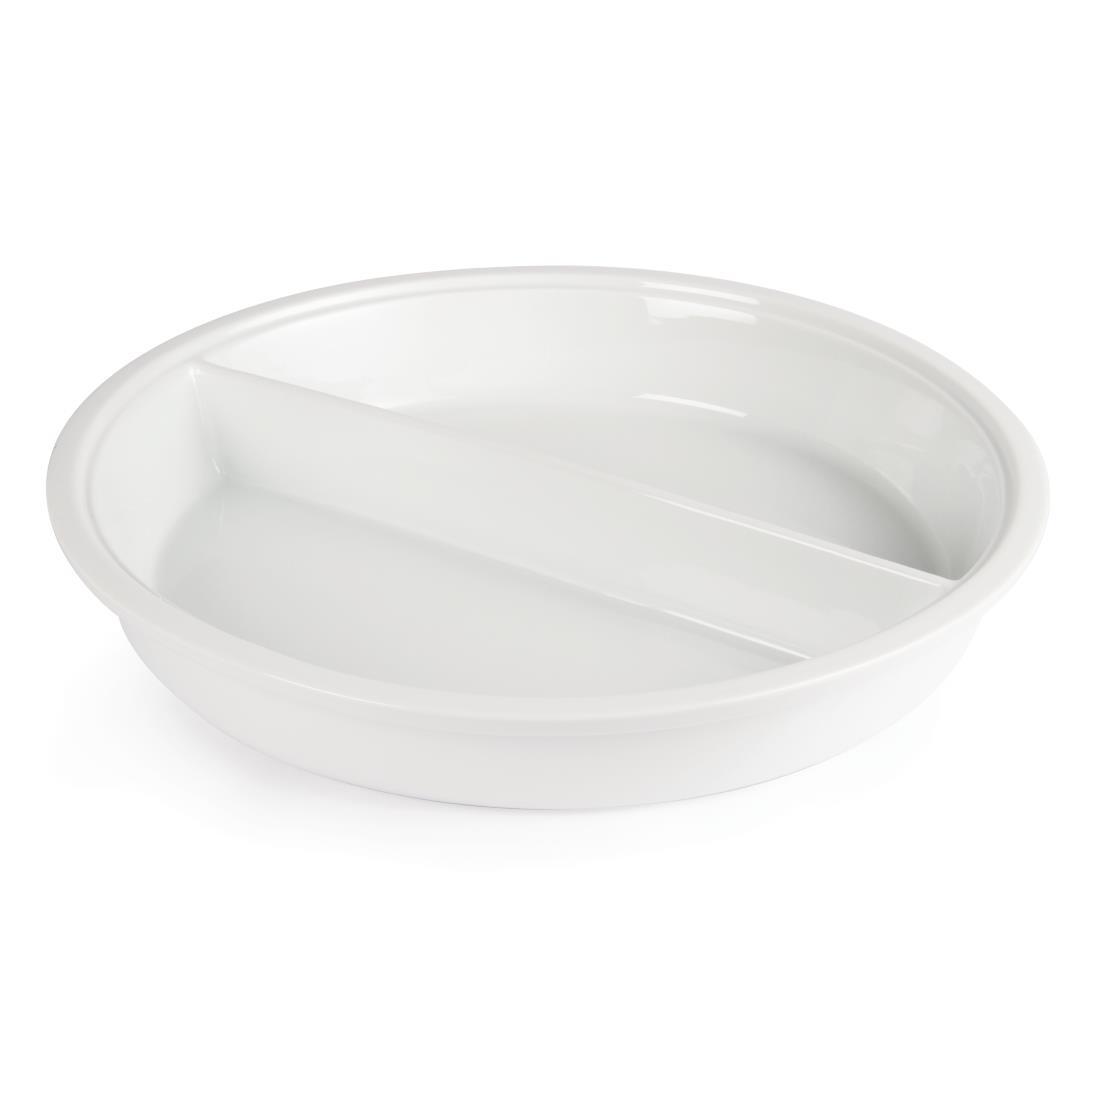 Olympia Divided Round Dish 3.5Ltr 123.1oz - CD711  - 3